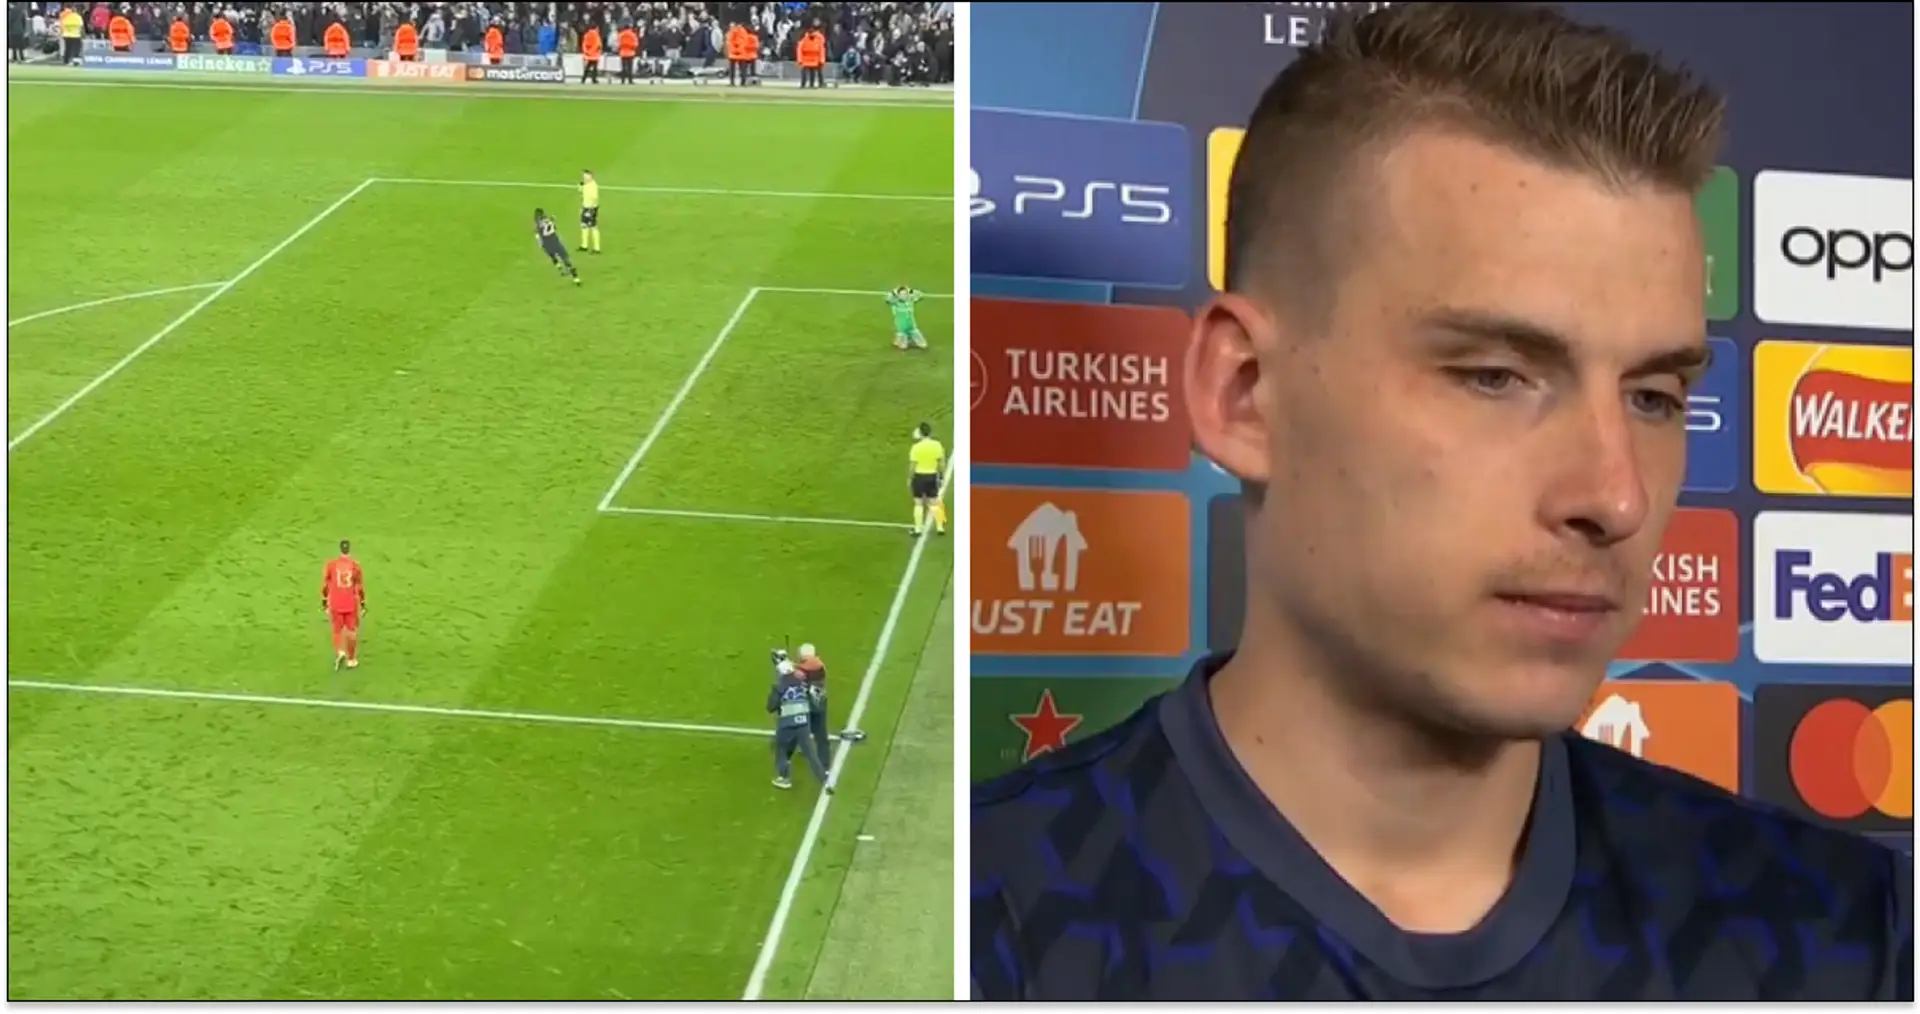 'Wanted to go save another one': Lunin's cold reaction to Rudiger winning City tie caught on camera